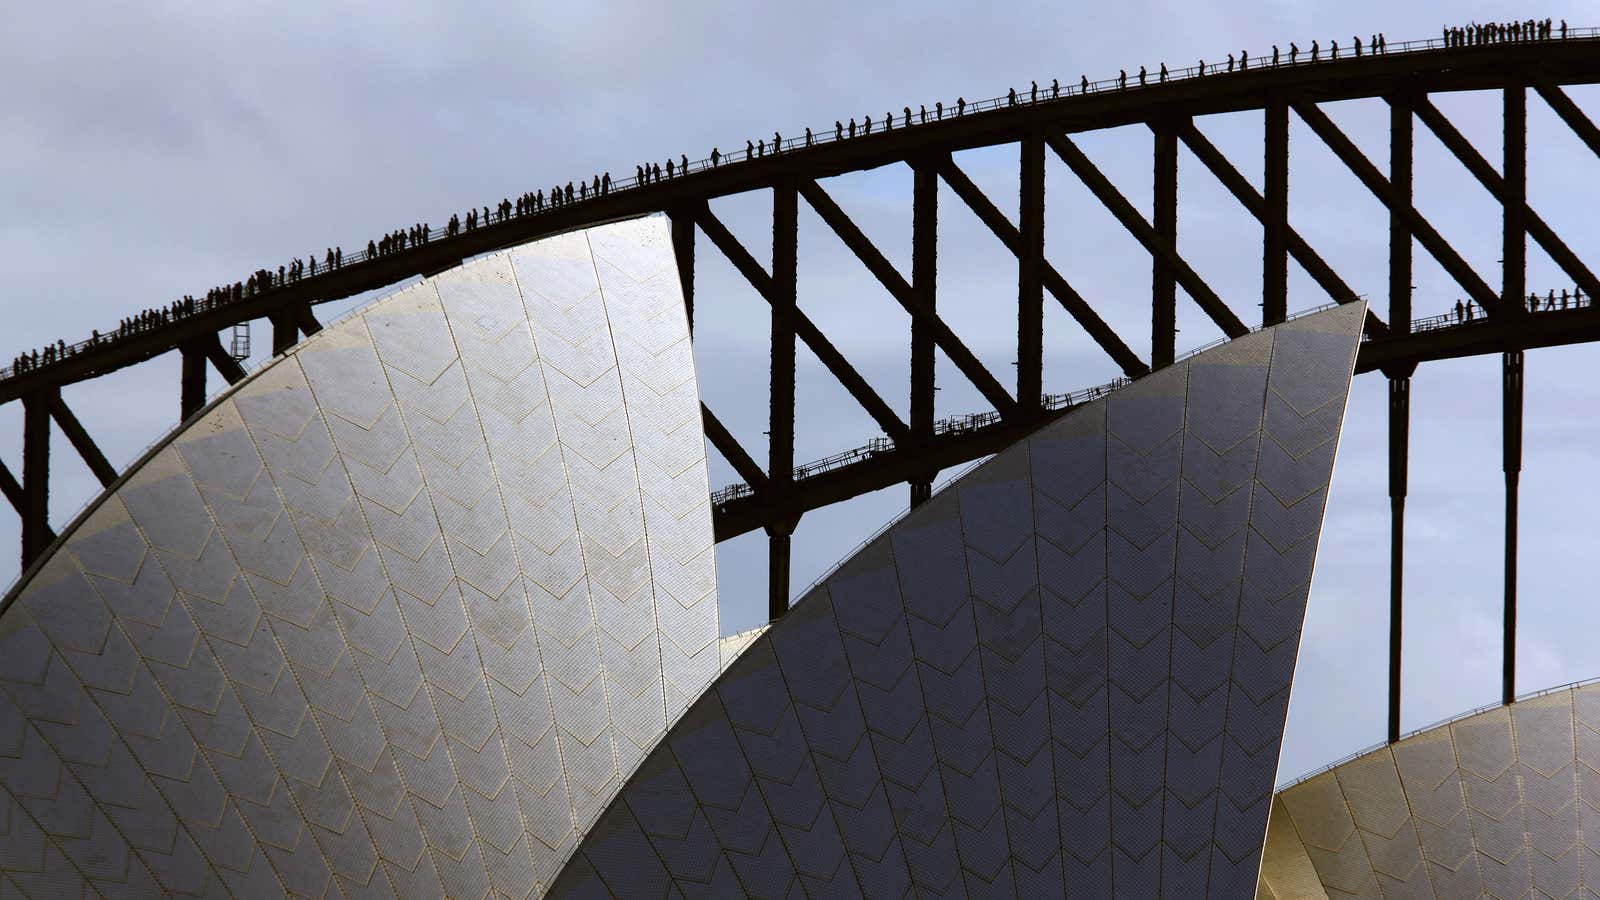 In Australia, the speculative bubble hasn’t spread to opera housing—yet.